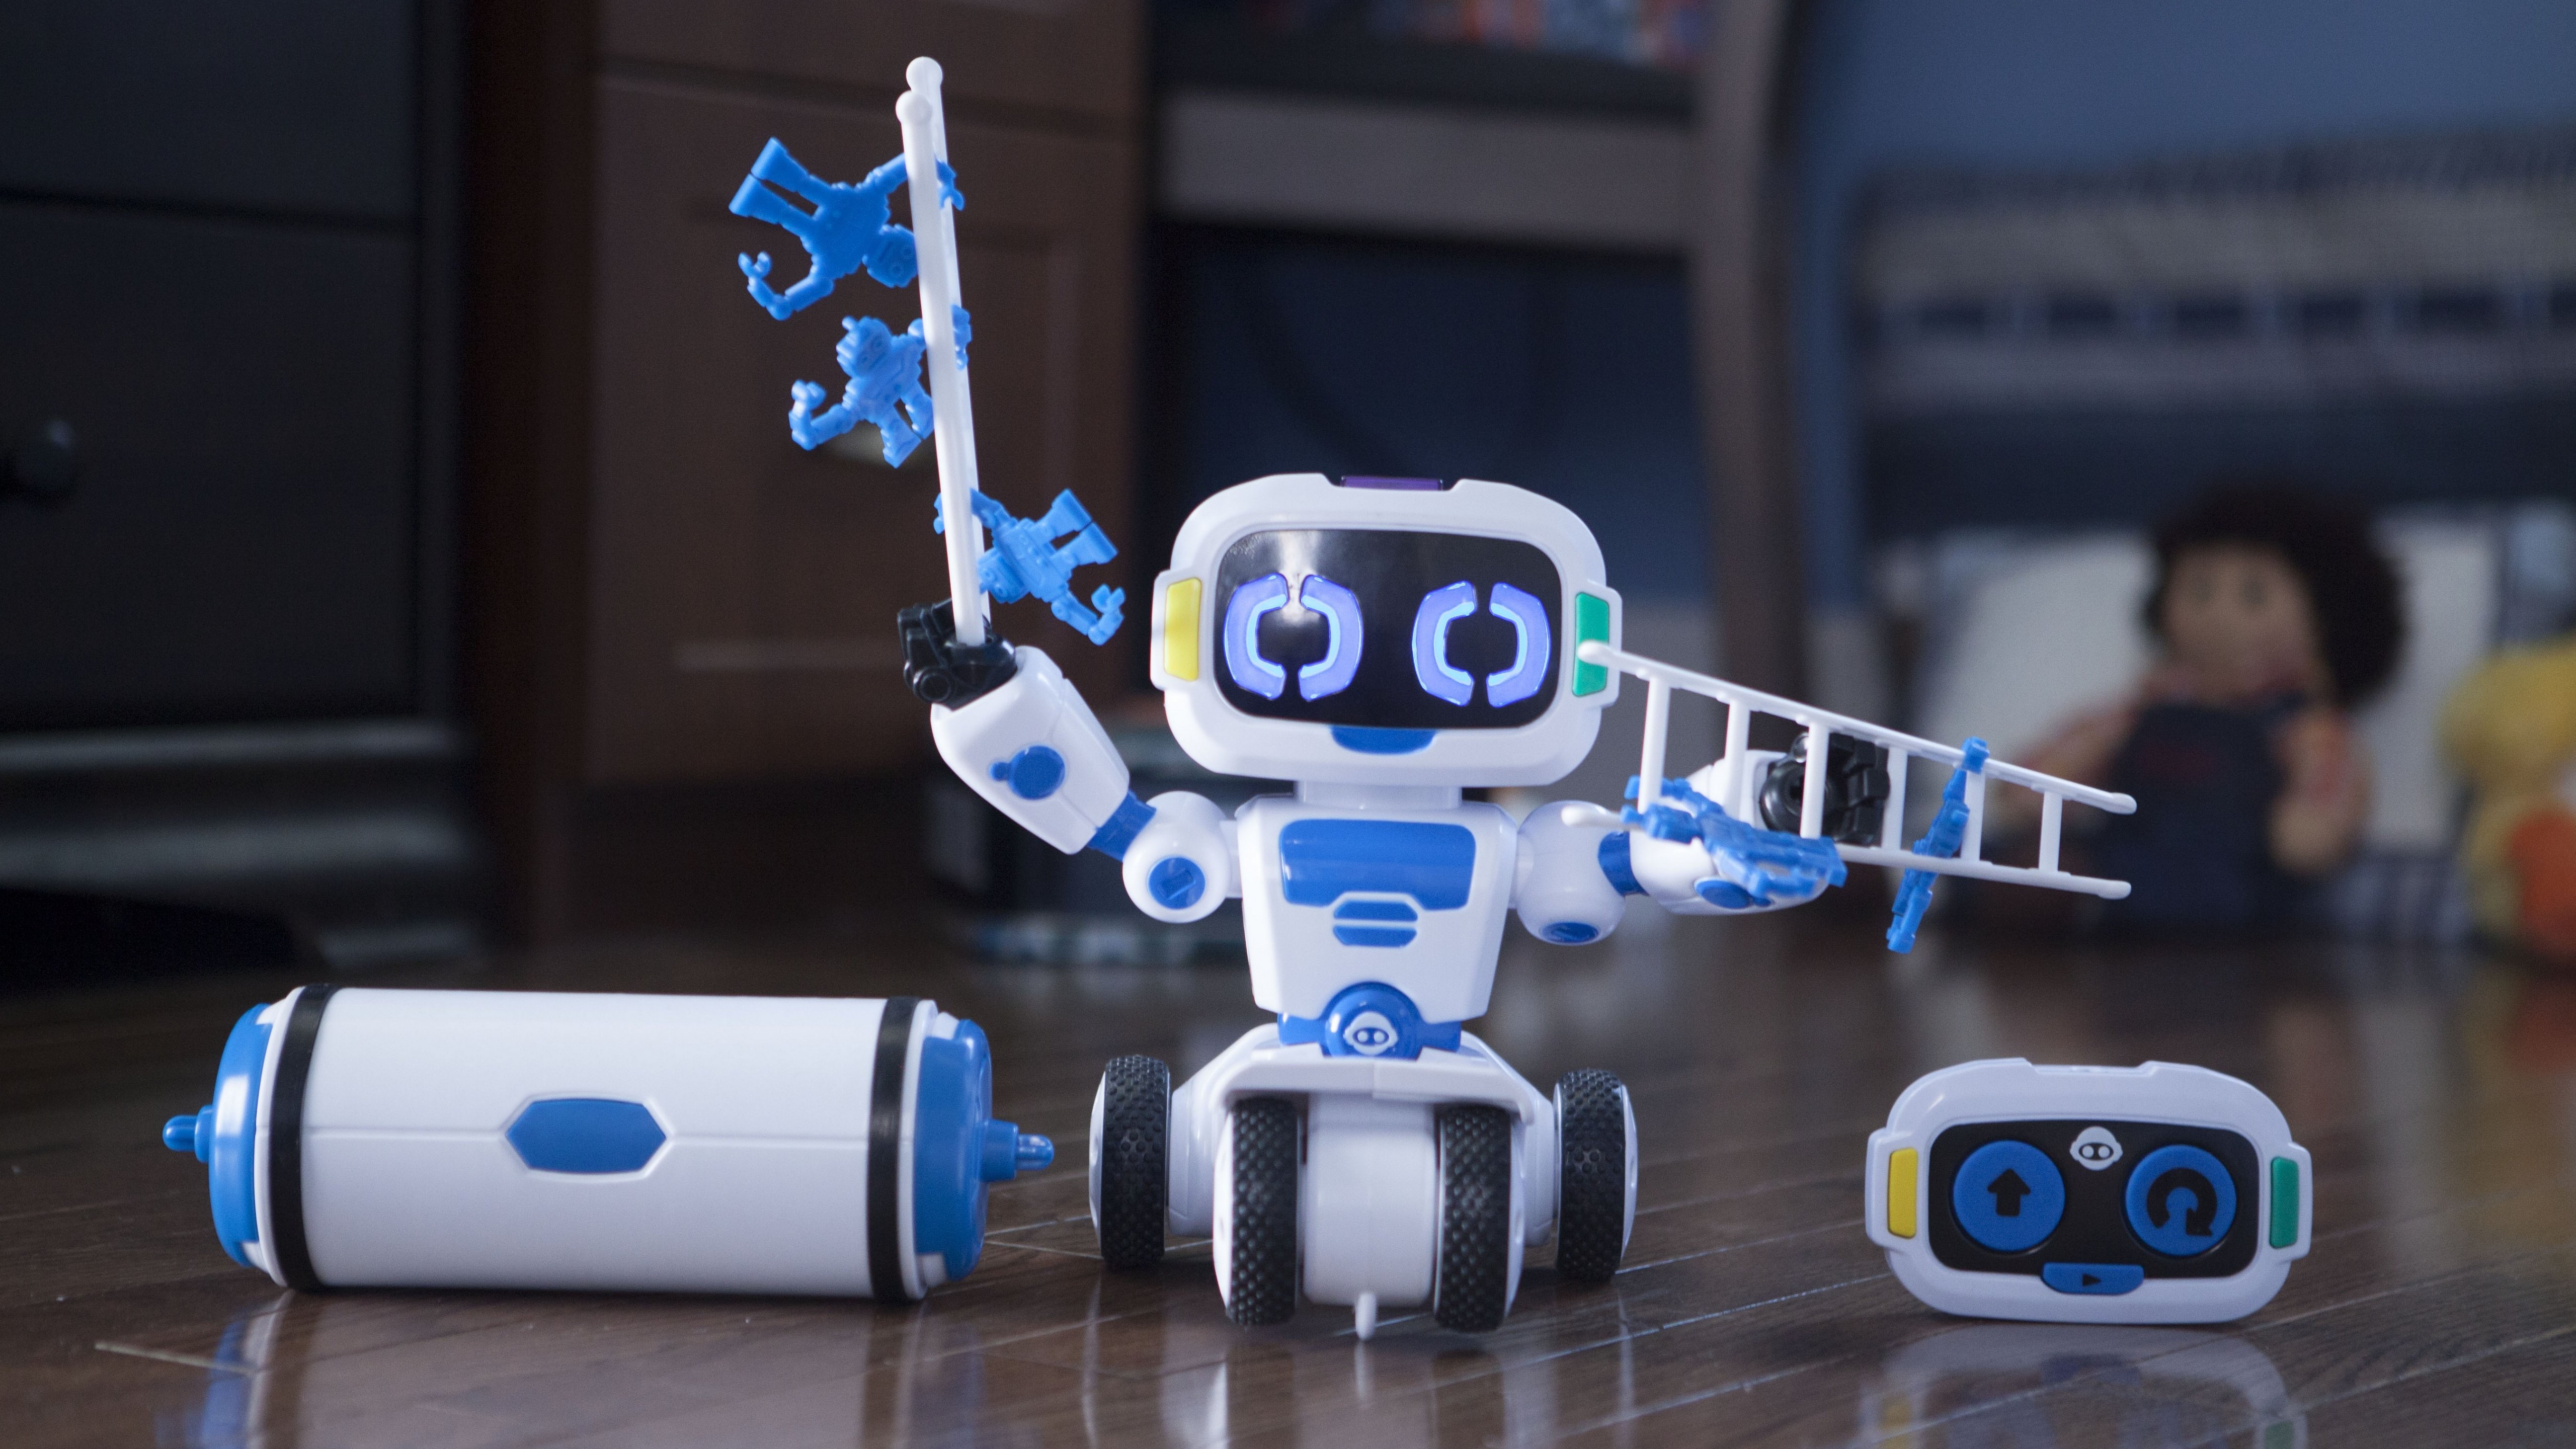 Wallpaper WowWee Tipster, Robot For Kids, Robotic Toy, Review, Test, Robotic Industry For Kids, Hi Tech